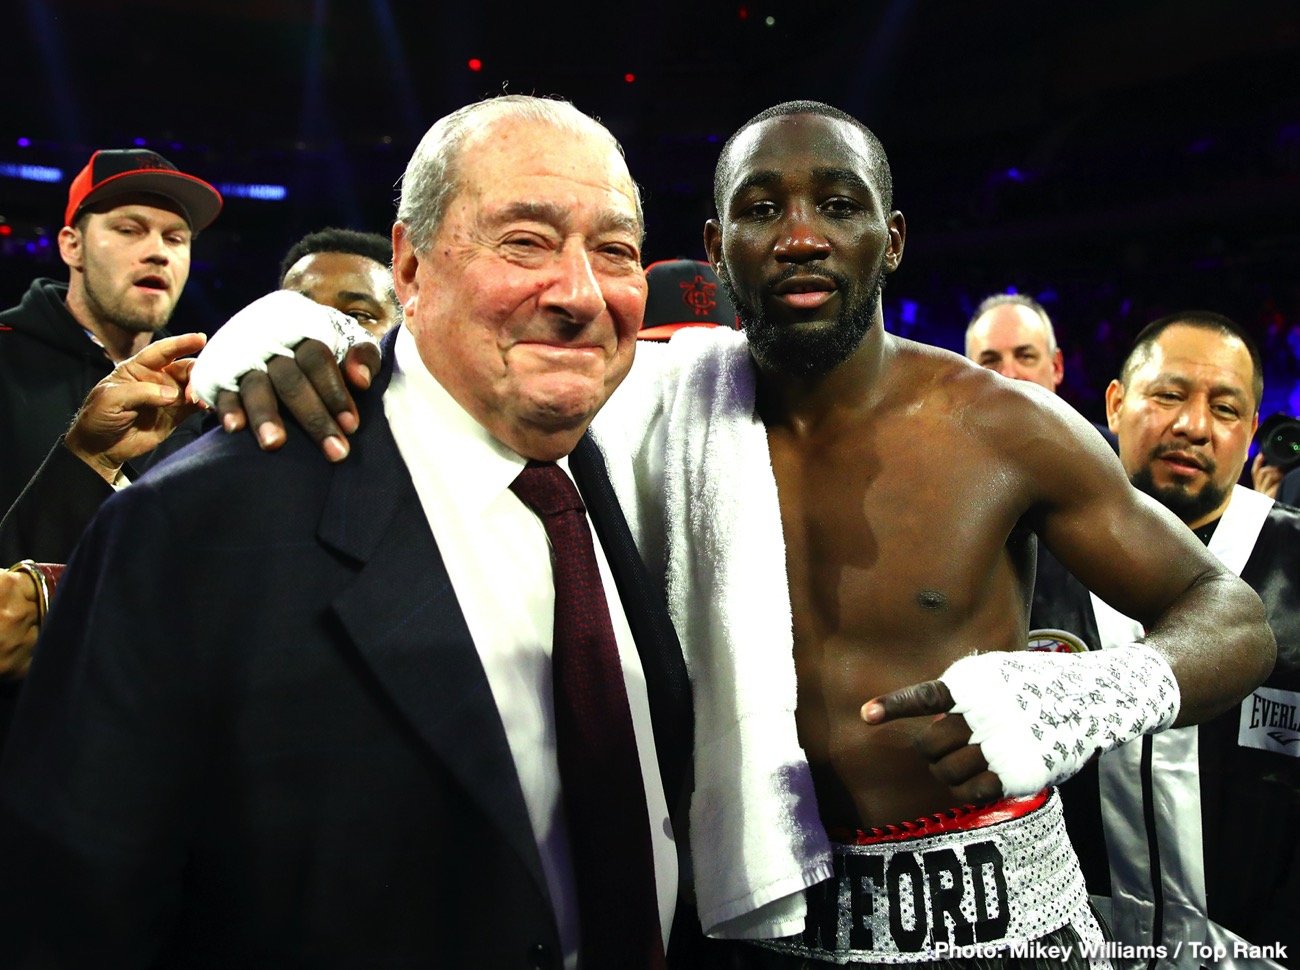 Image: Arum blaming Errol Spence for Terence Crawford fight not happening